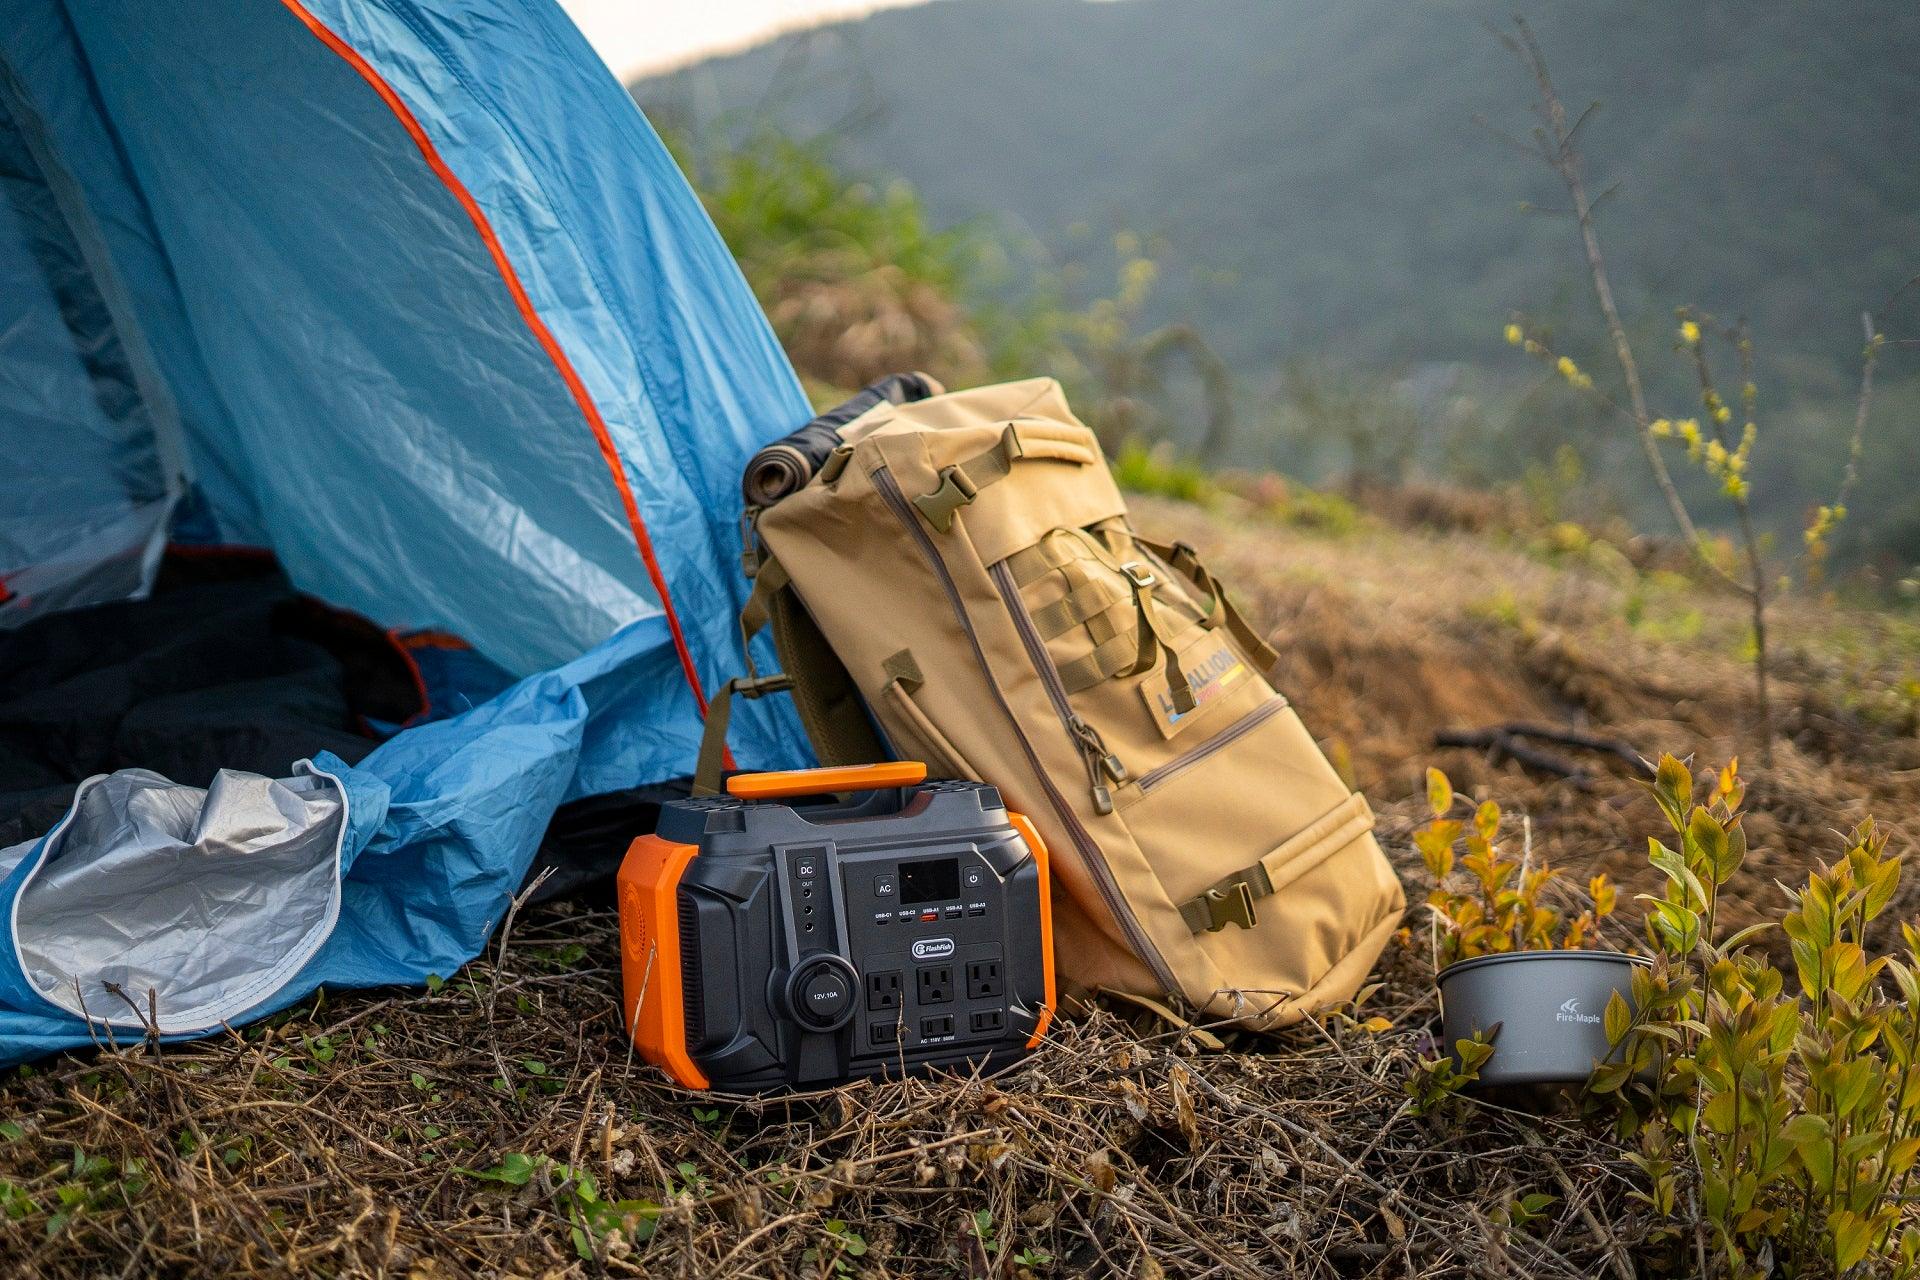 How to Choose an Outdoor Power Supply Suitable for Spring Camping?